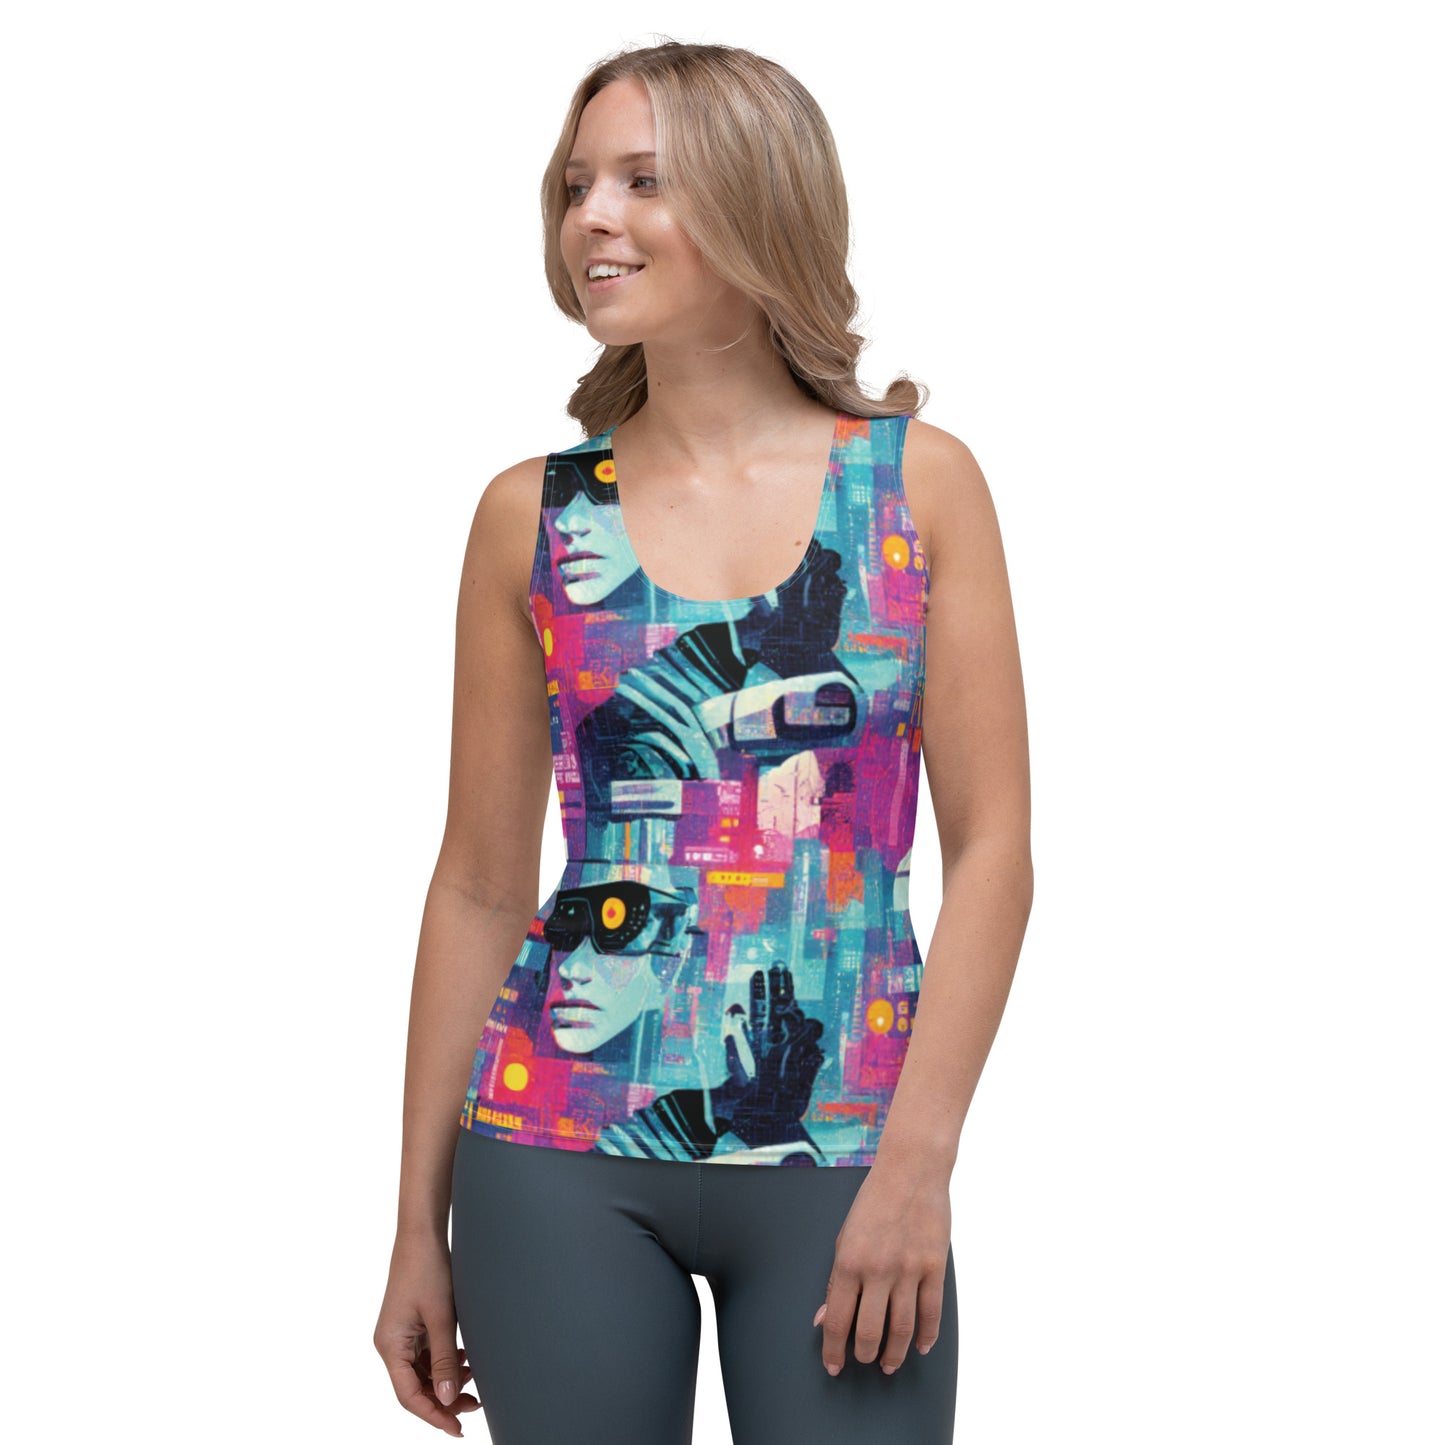 Cyber Girl Collage v1 Tank Top